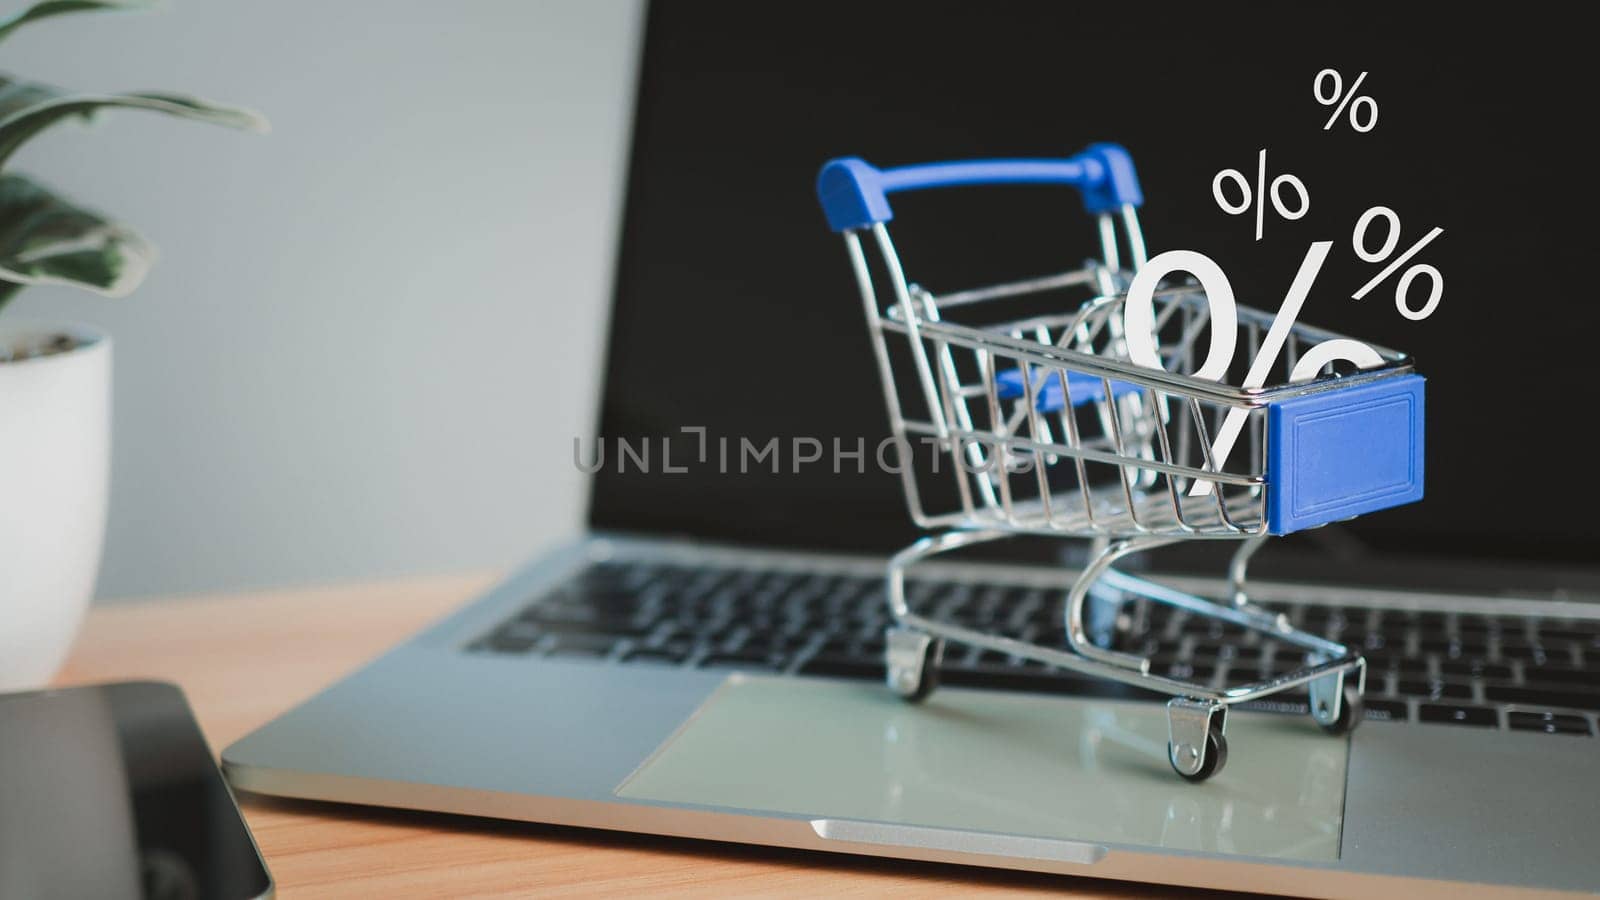 Sale percentage falling in shopping cart located on a computer keyboard, Online shopping concept Special price product, Specials and promotions by Unimages2527